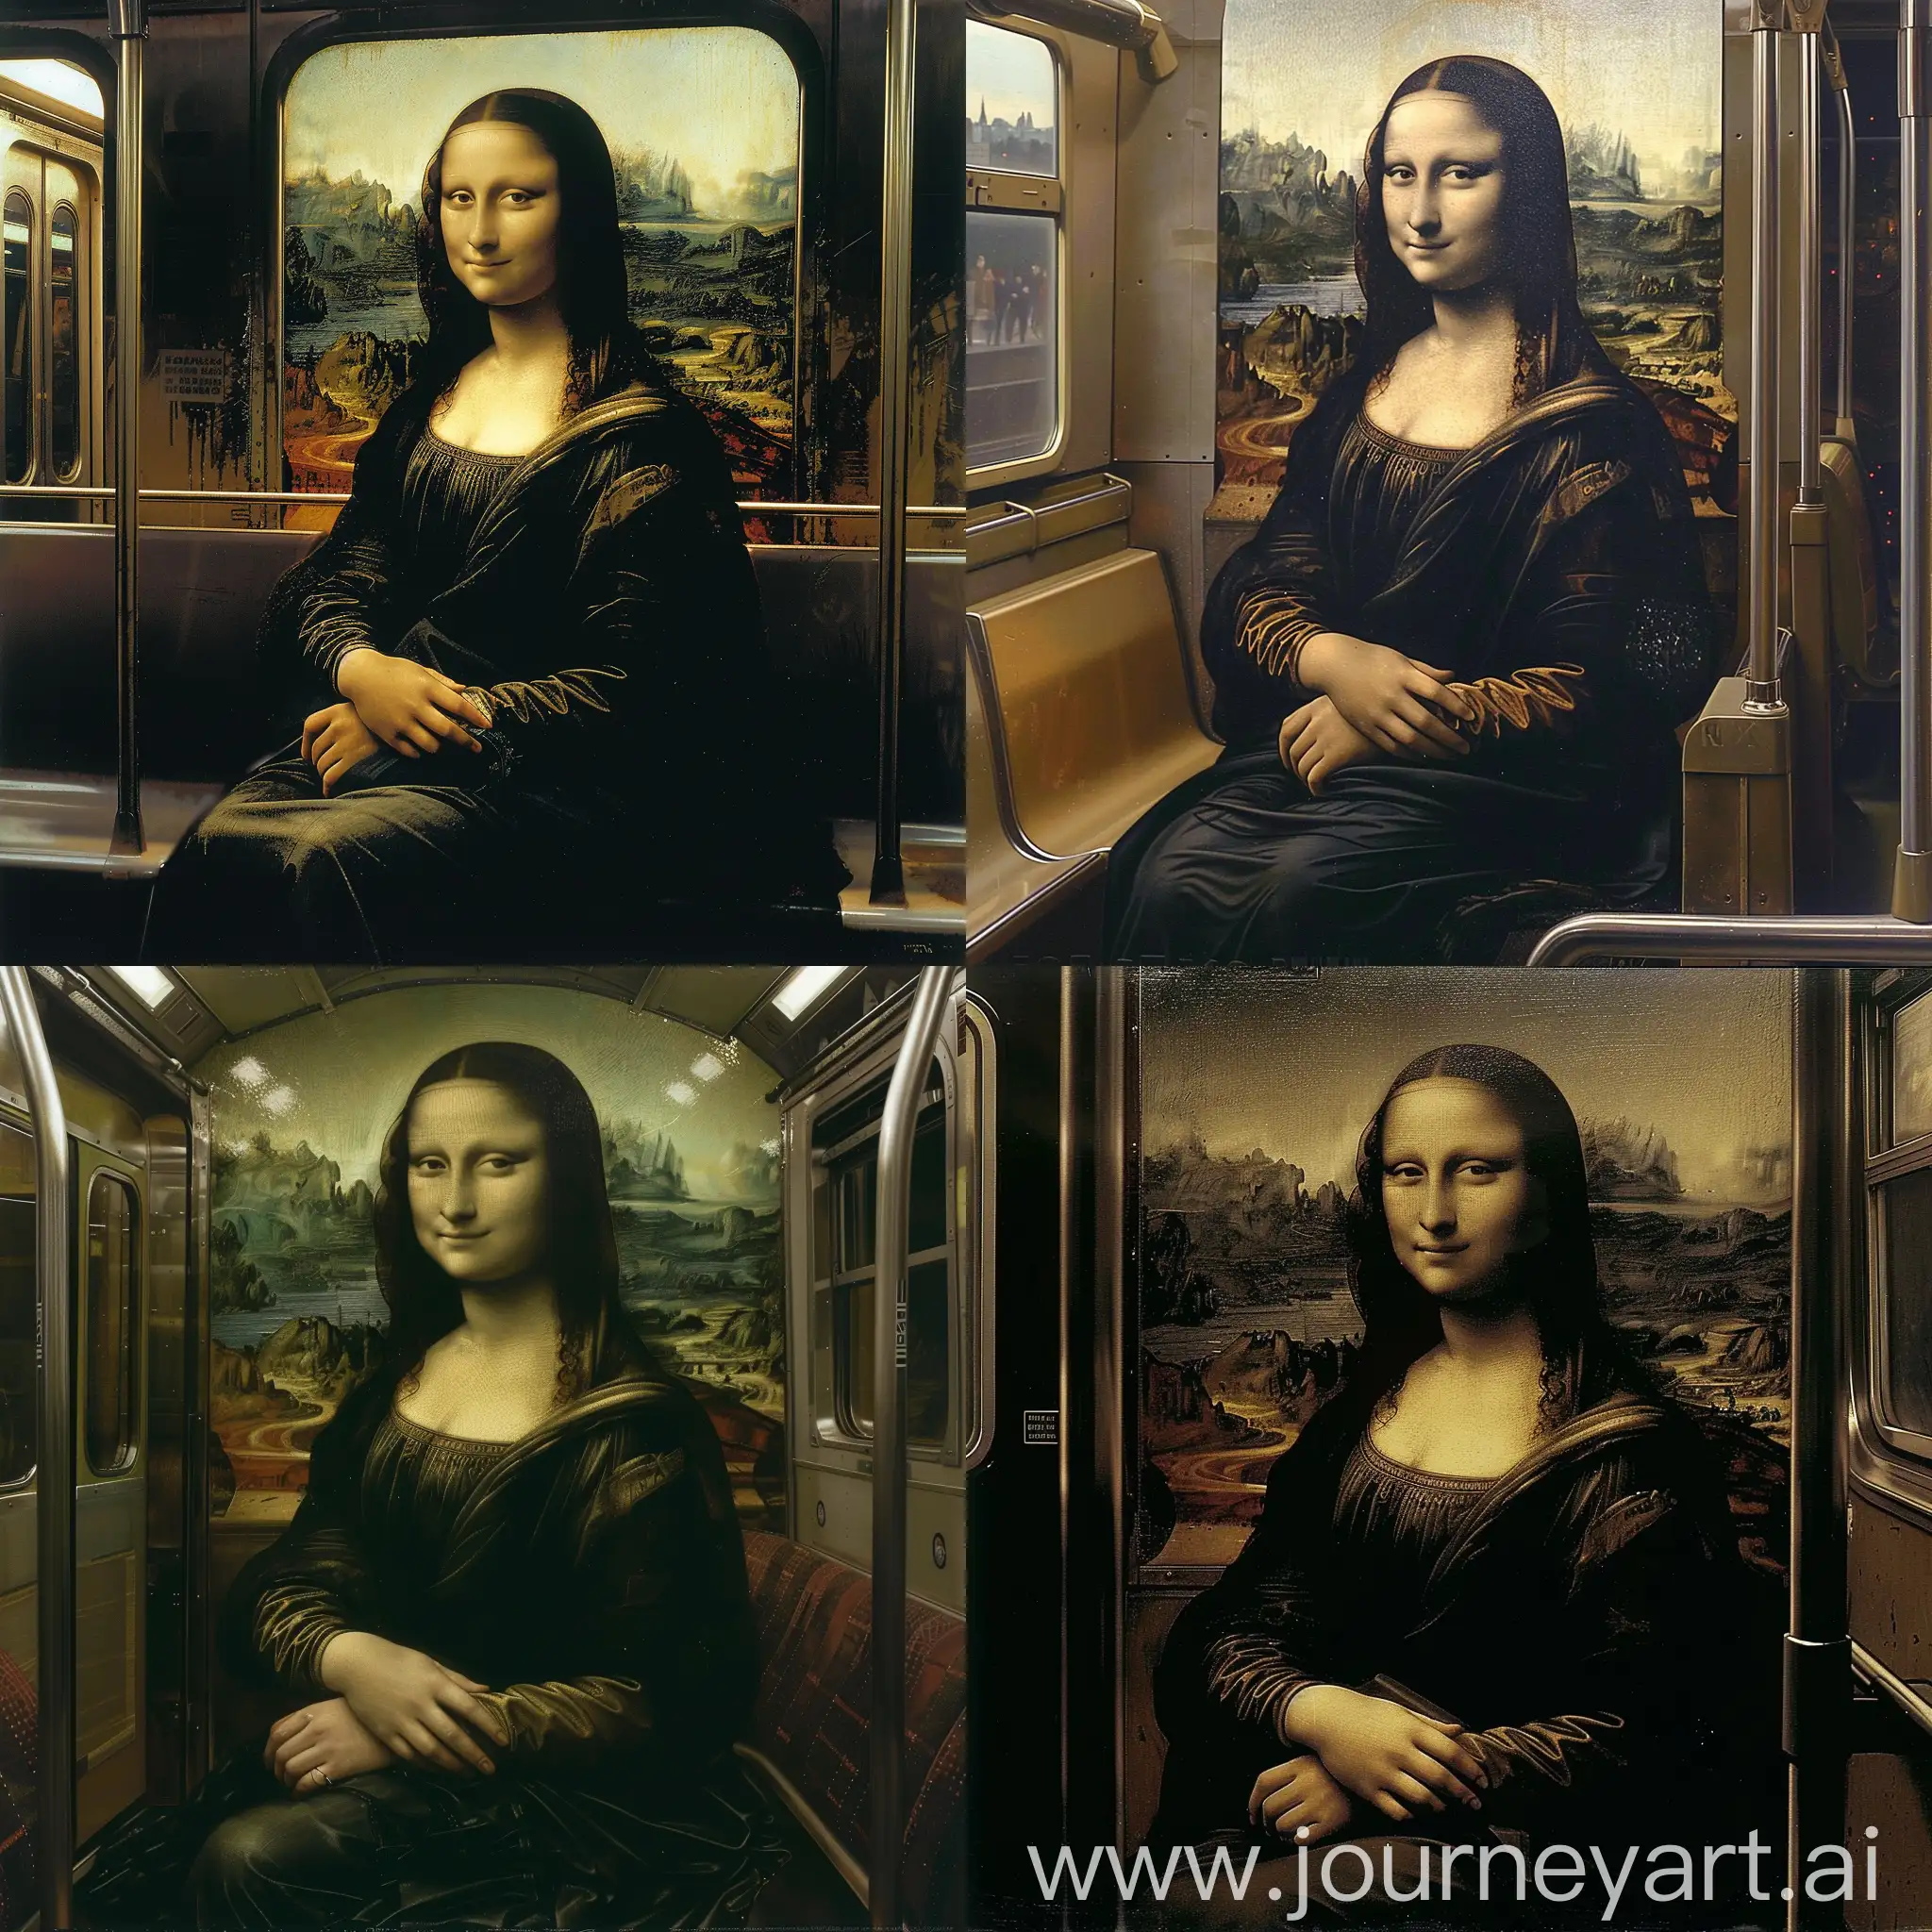 Freed from the walls of the Louvre, the Mona Lisa in the subway. Sitting elegantly. An enigmatic smile flashes.. The appearance of the Mona Lisa, which seems to travel through time, stimulates the imagination. It allows for various interpretations. --ar 4:5